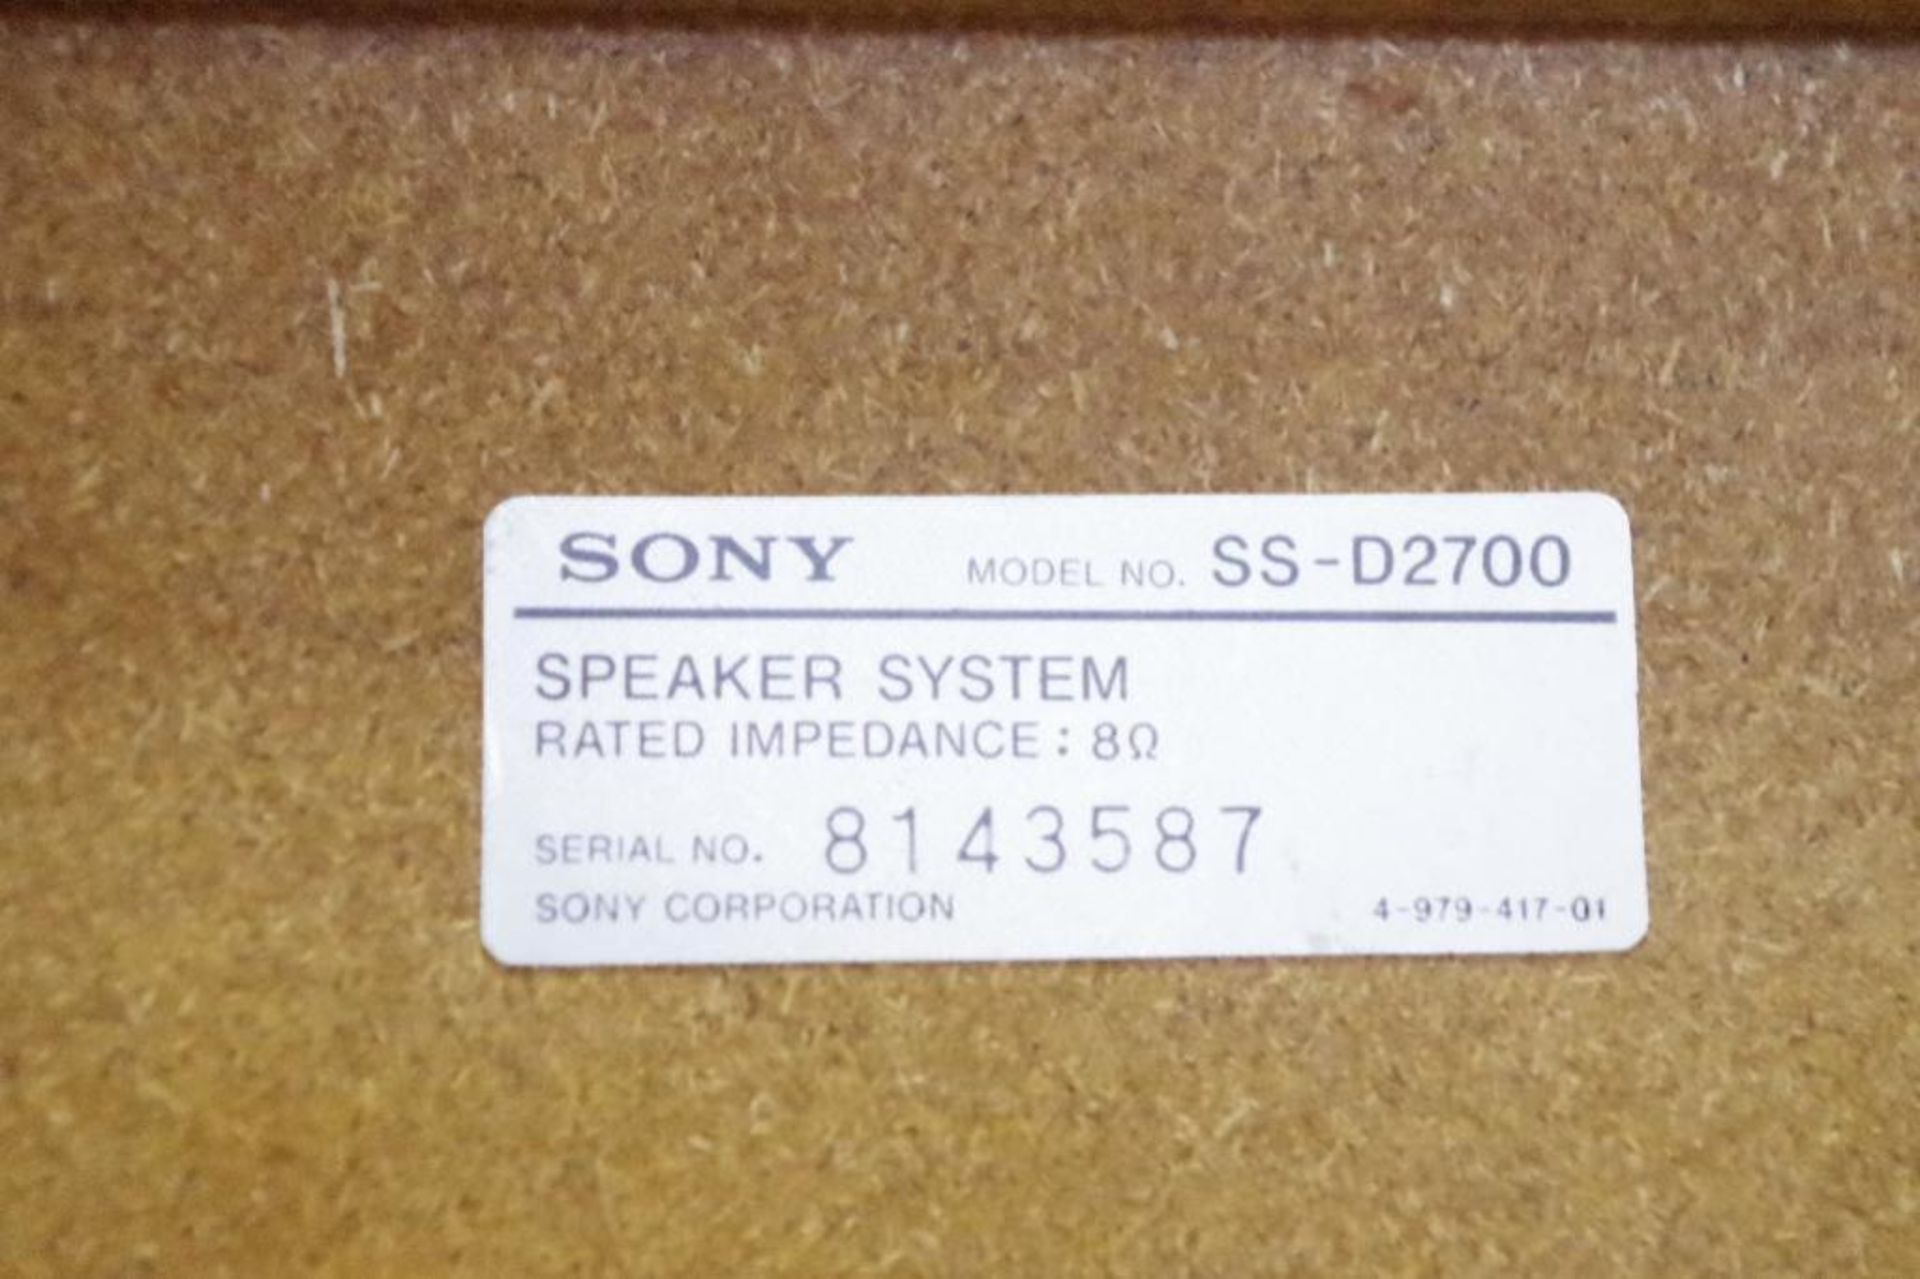 SONY Rack Style Stereo System w/ Speakers, Remote Control & Cabinet M/N LBT-D270 - Image 8 of 8